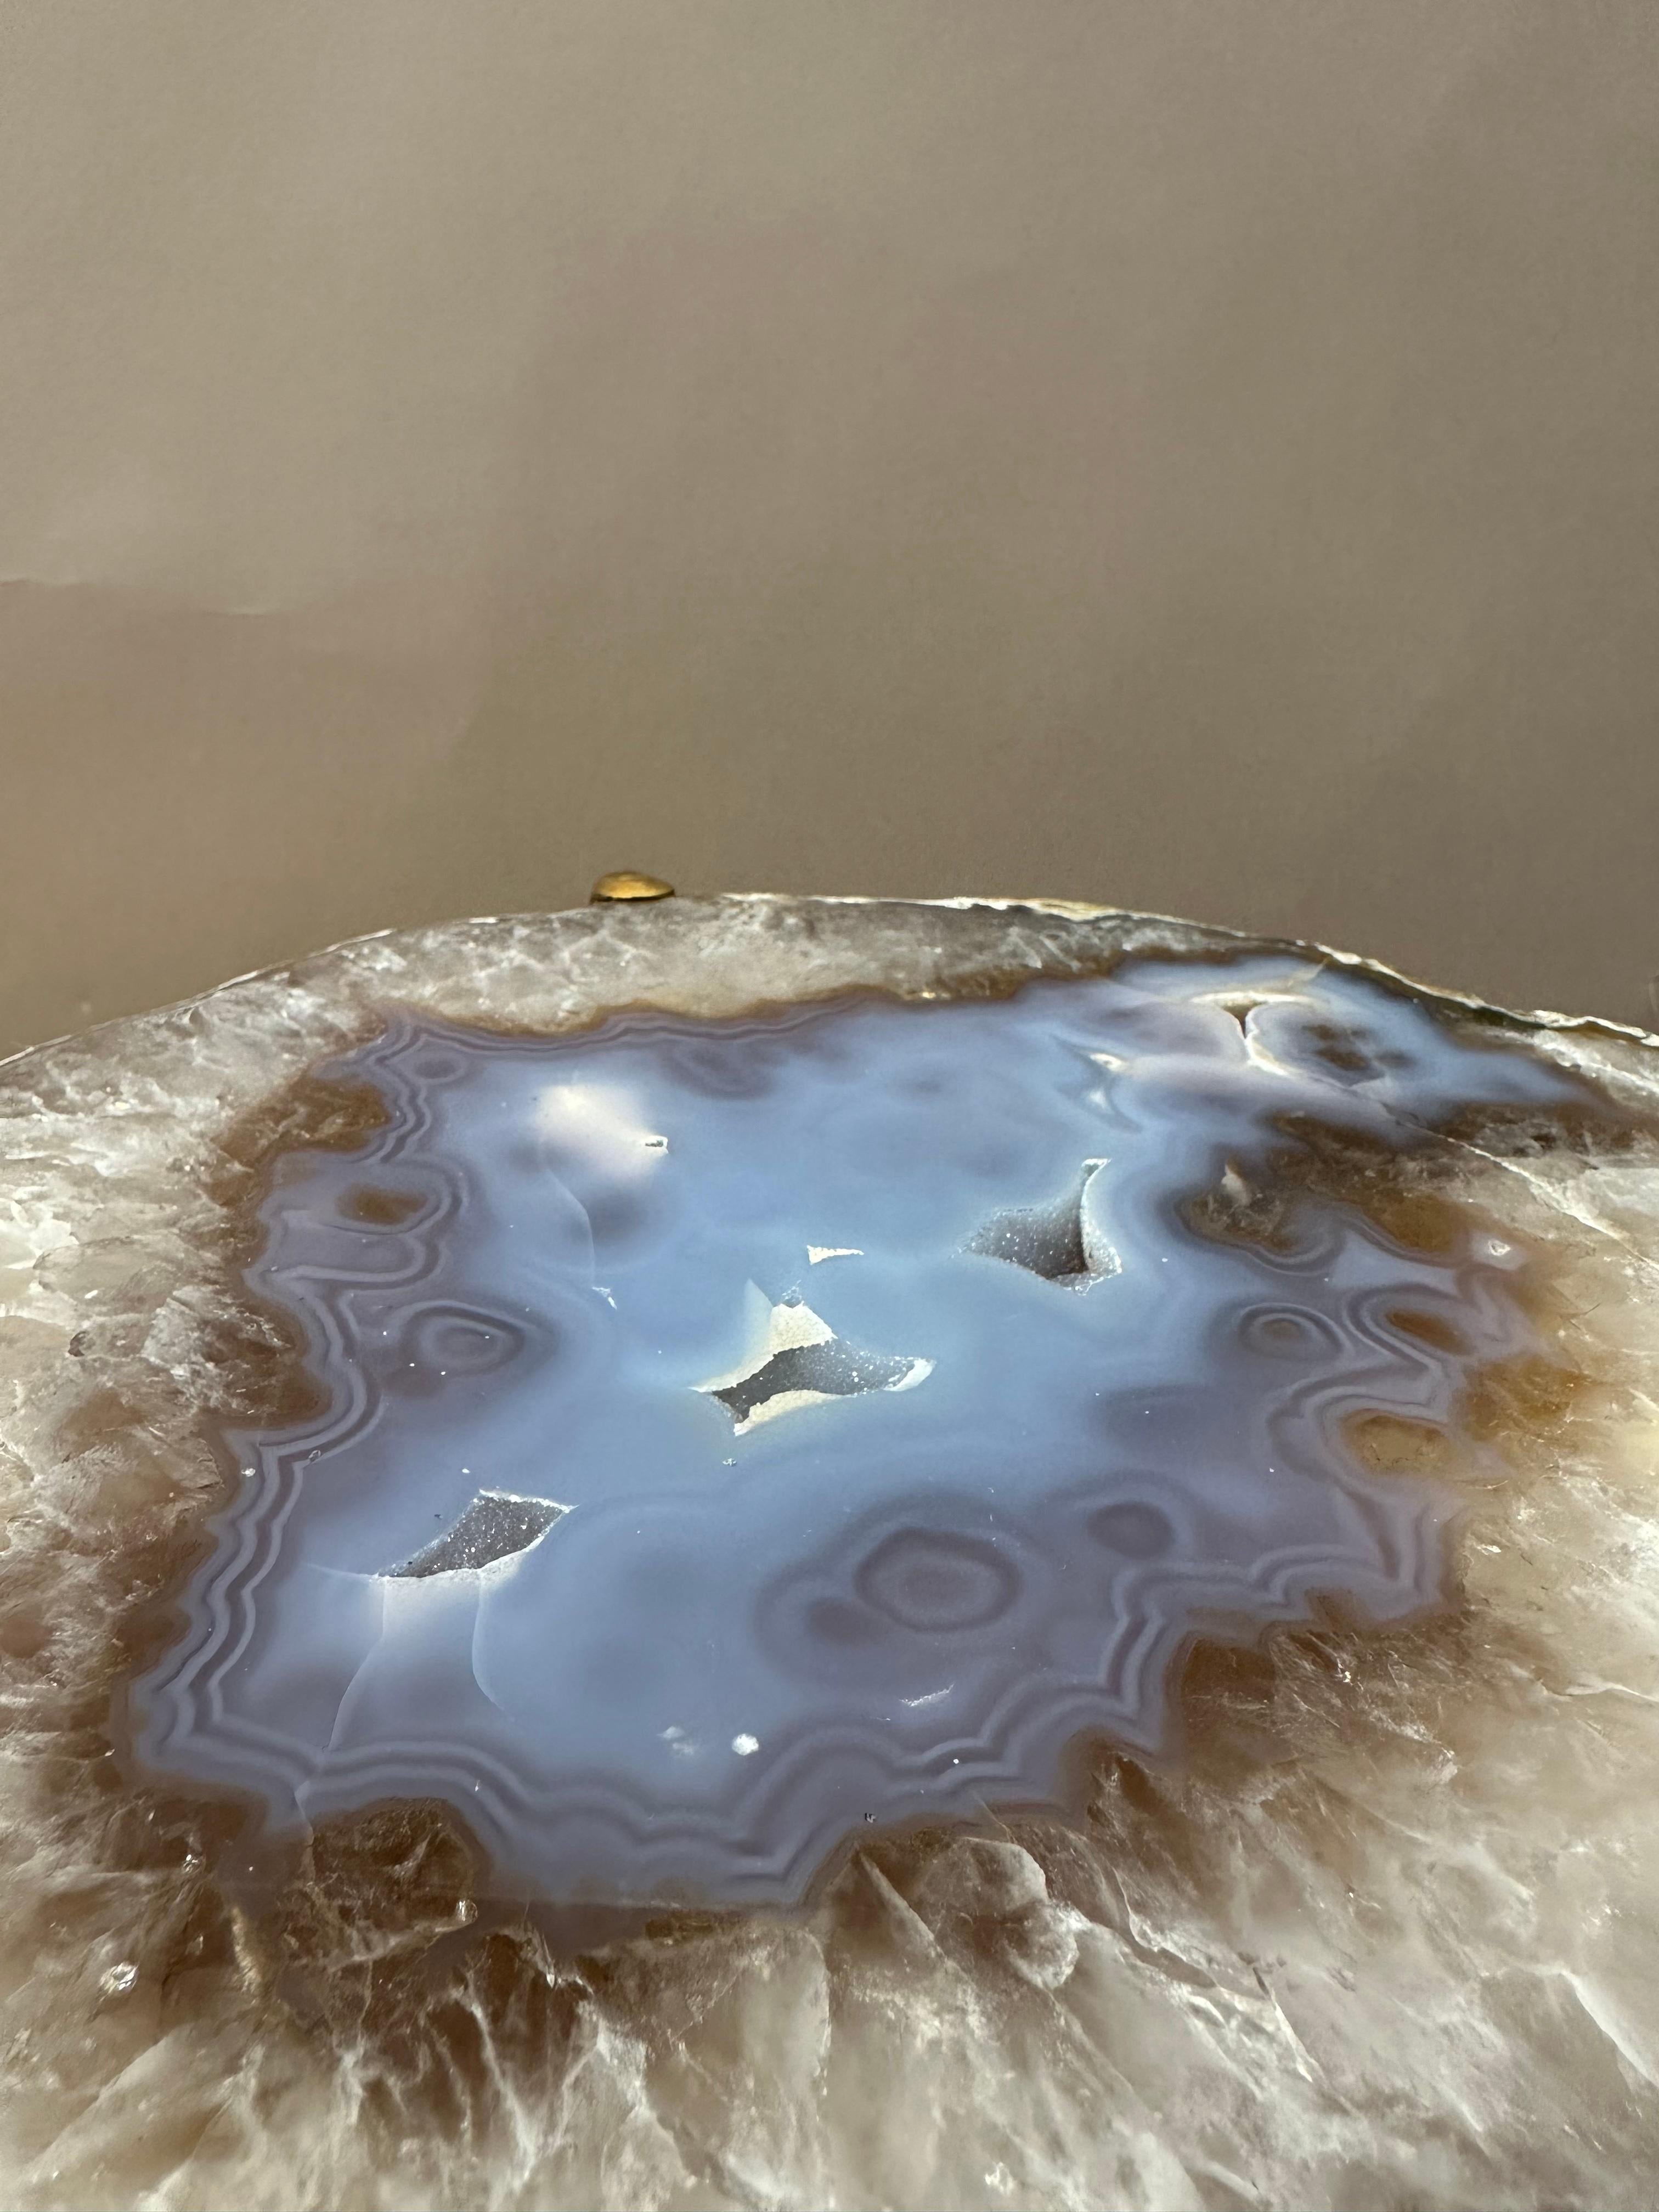 Unusual Modern Handcrafted Geode Drinks Table In New Condition For Sale In Middleburg, VA